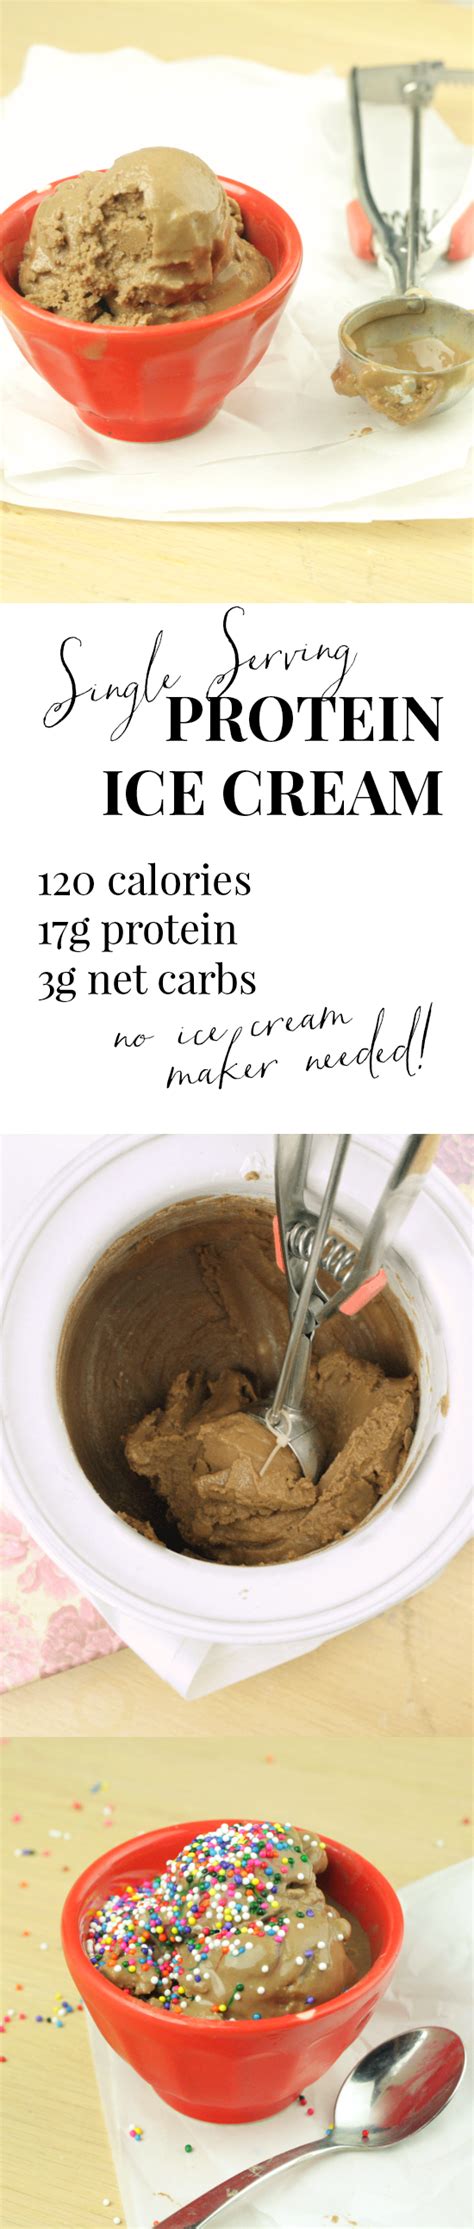 Get full nutrition facts and other common serving sizes of ice cream including 1 oz and 1 small scoop/dip. Protein Ice Cream | Recipe | Protein ice cream, Low carb ...